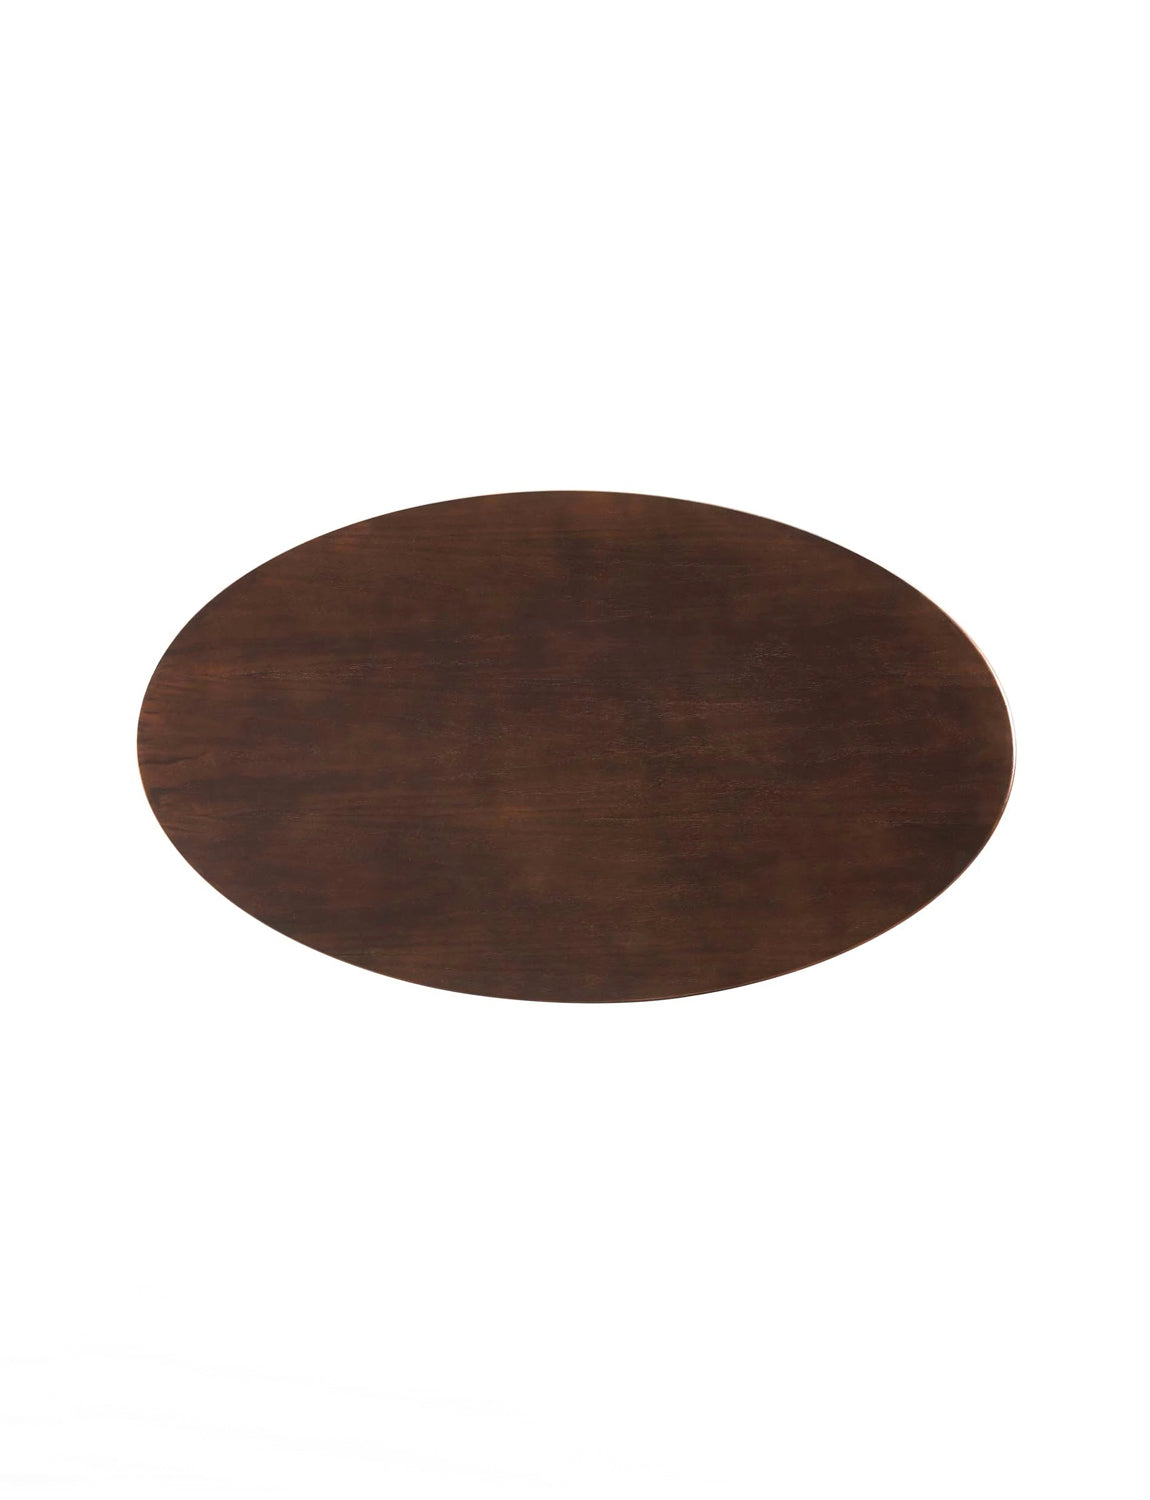 Lily Cherry Walnut Oval Dining Table, white base